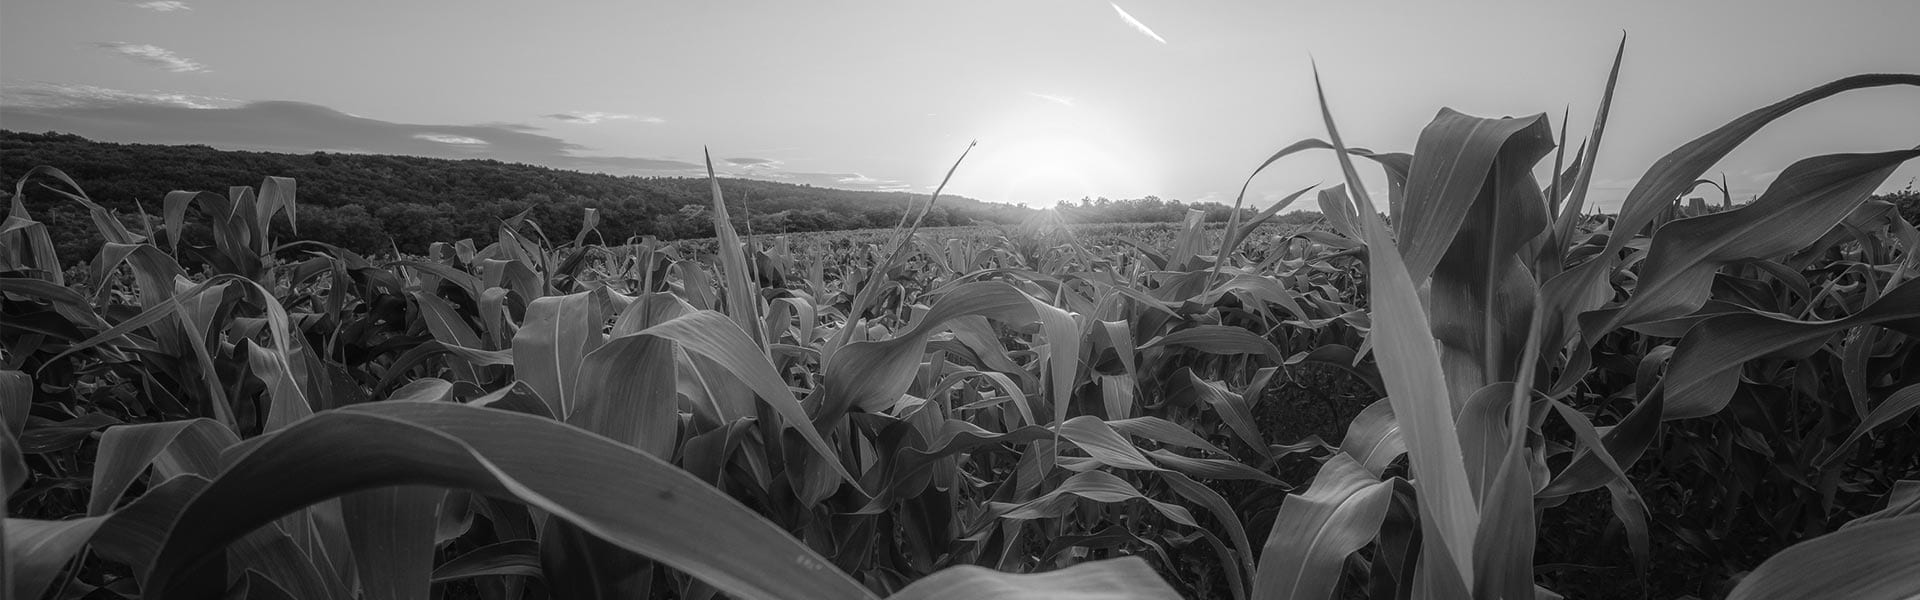 Young-green-corn-growing-on-the-field-at-sunset-600